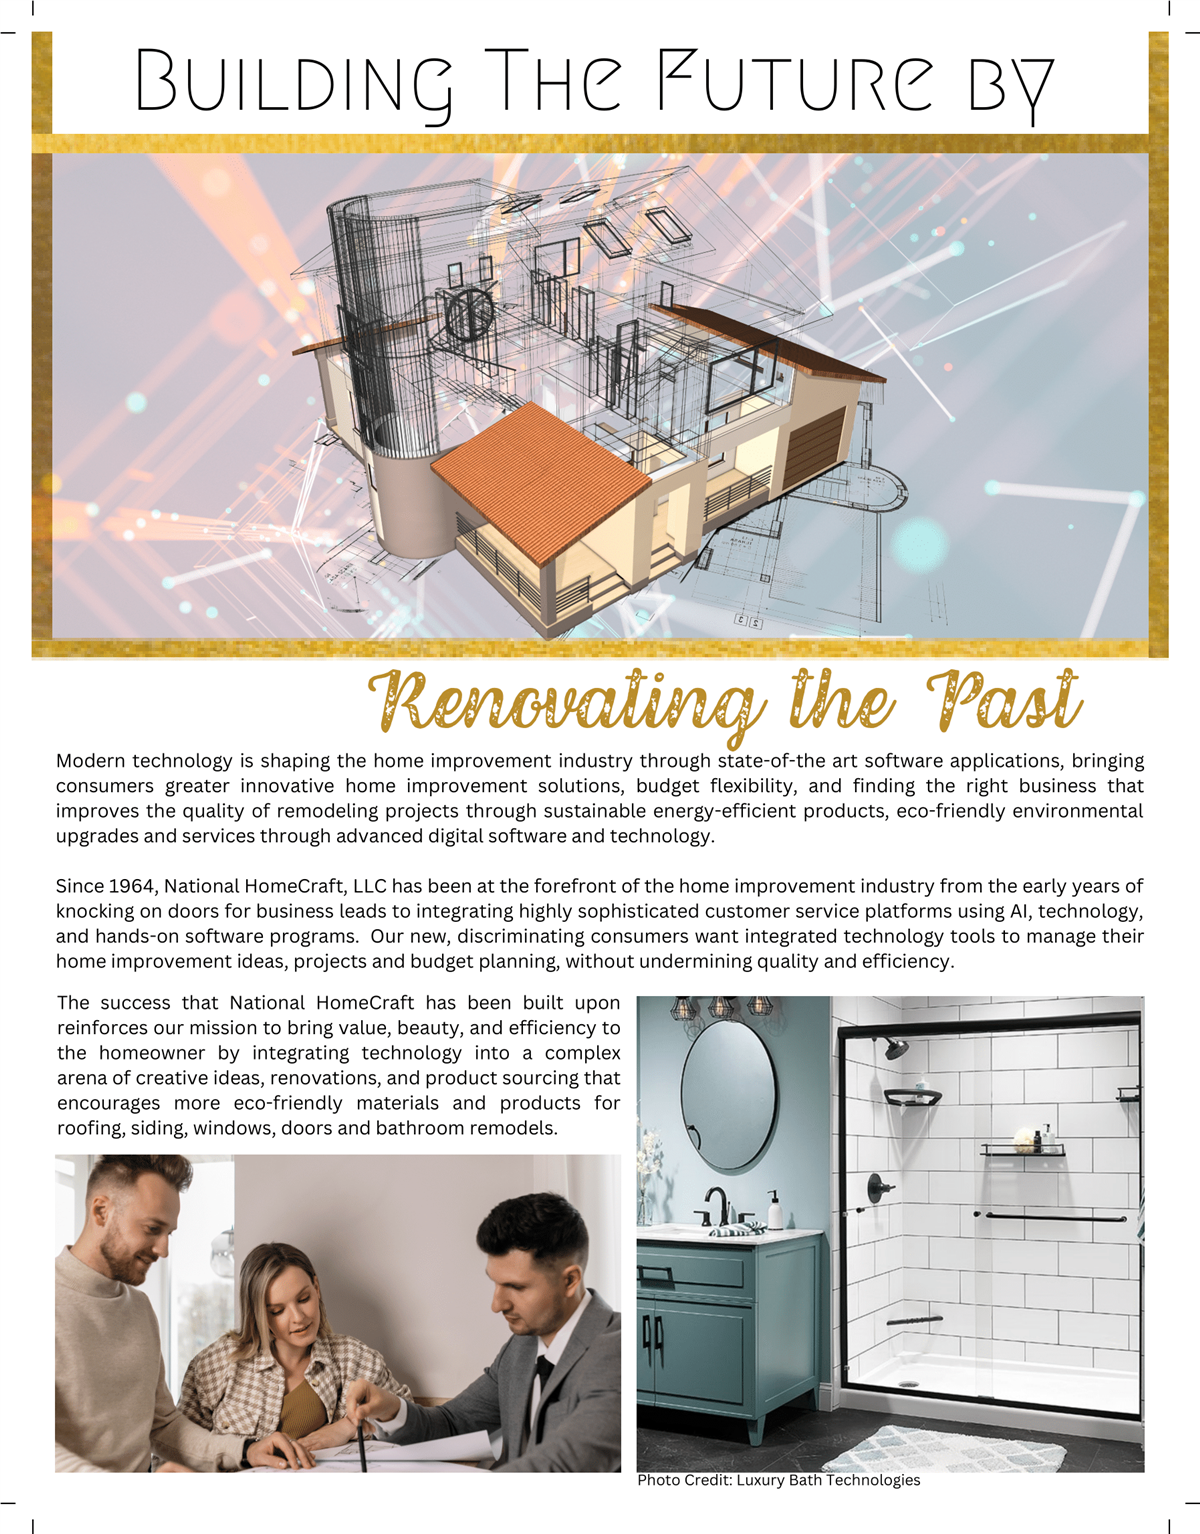 Ocala Style Magazine: Building The Future By Renovating The Past - National HomeCraft Feature Piece